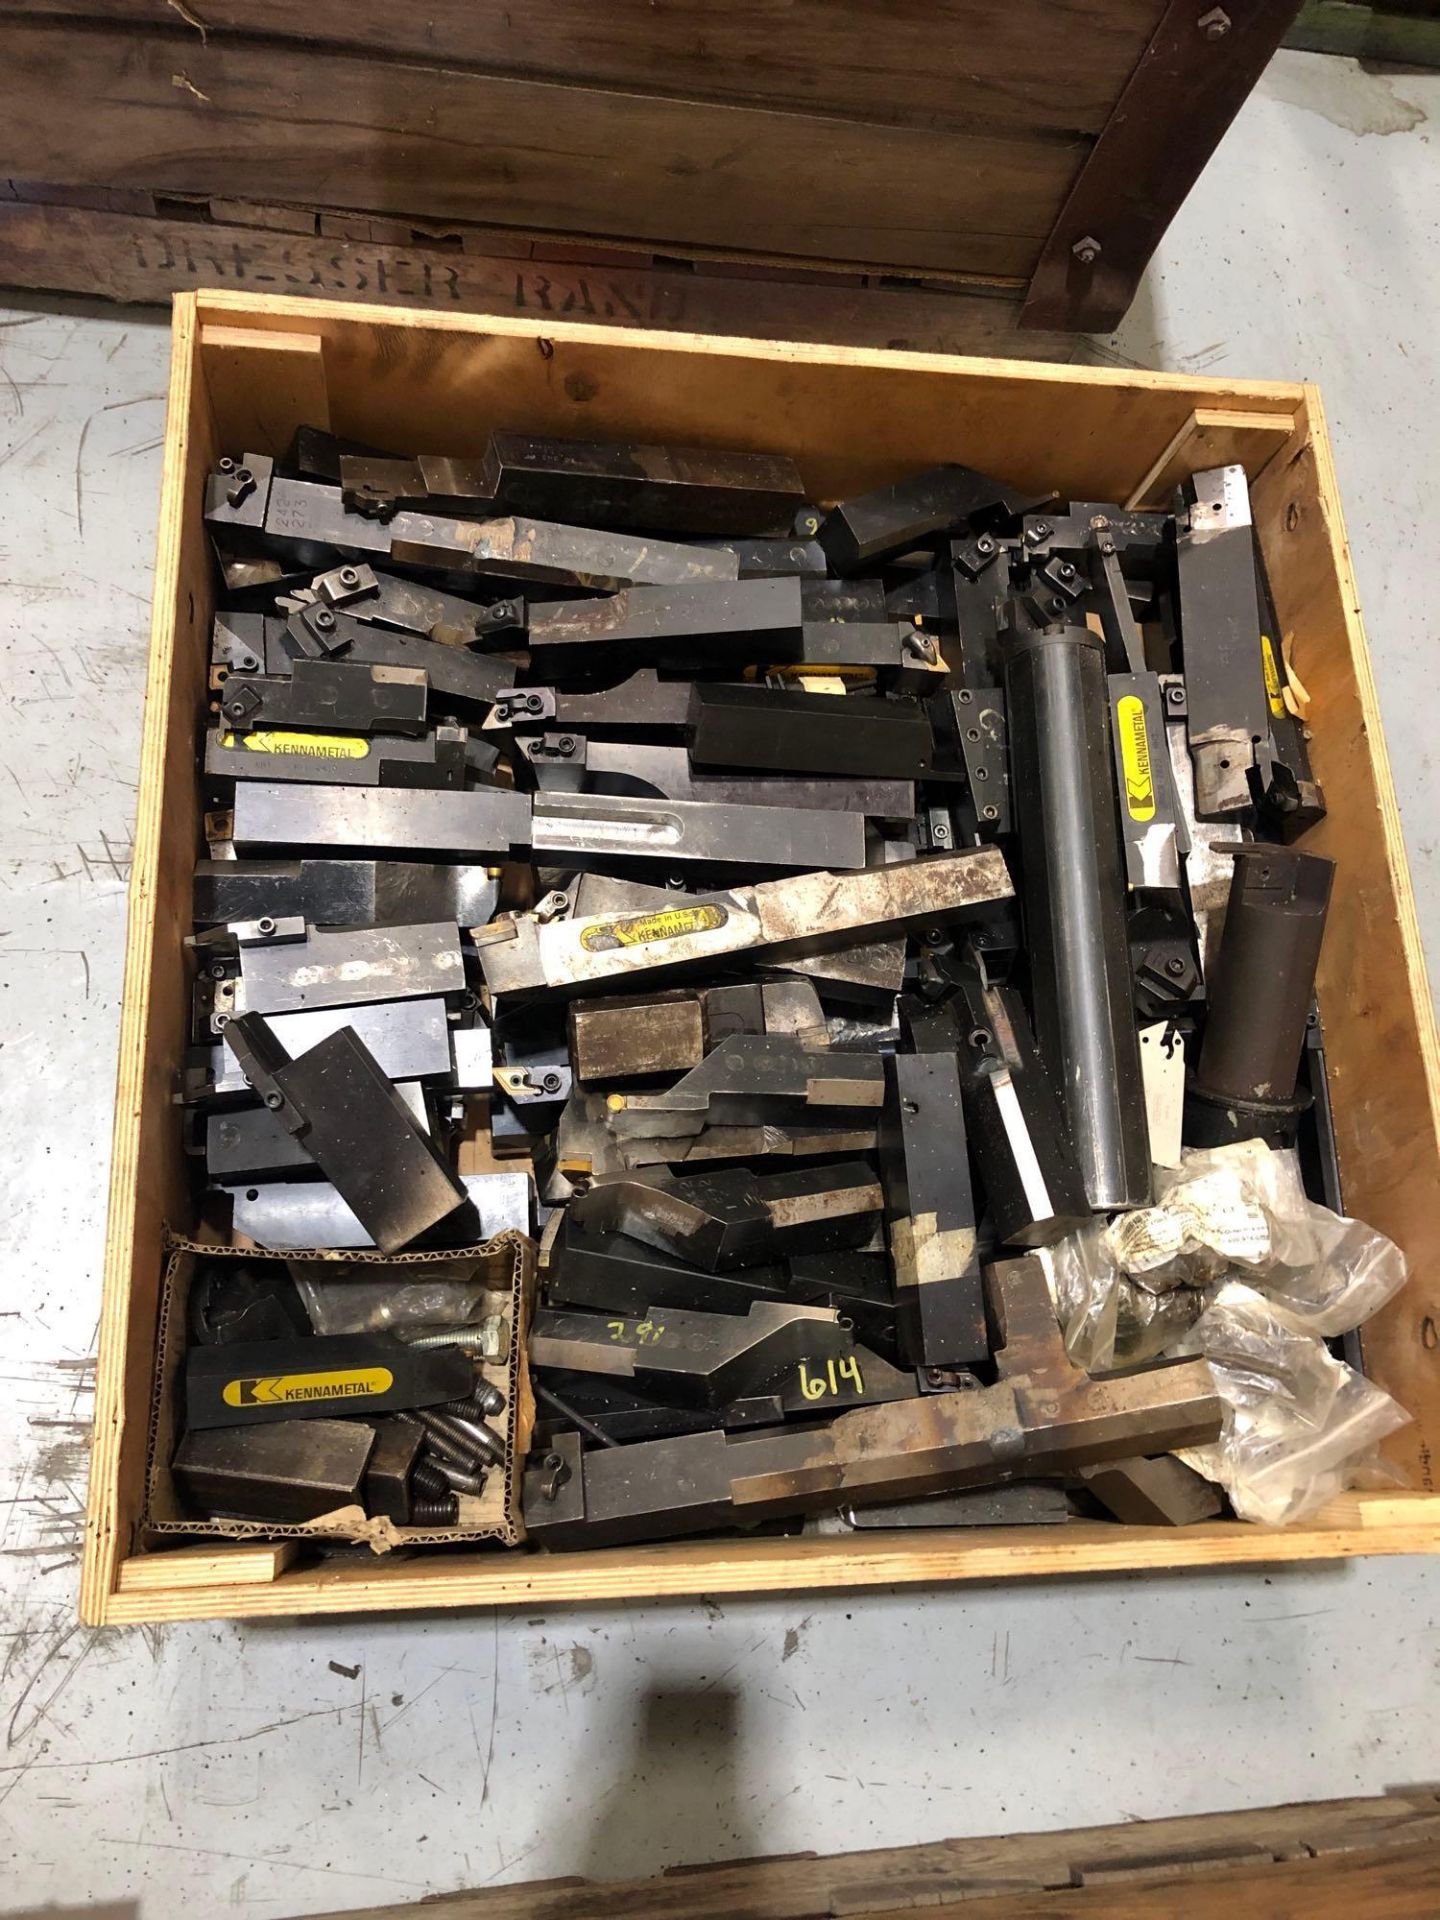 Lot of Carbide Insert Cutters, Holders, Boring Bar, and Misc items in Wood Box / Crate - Image 2 of 3